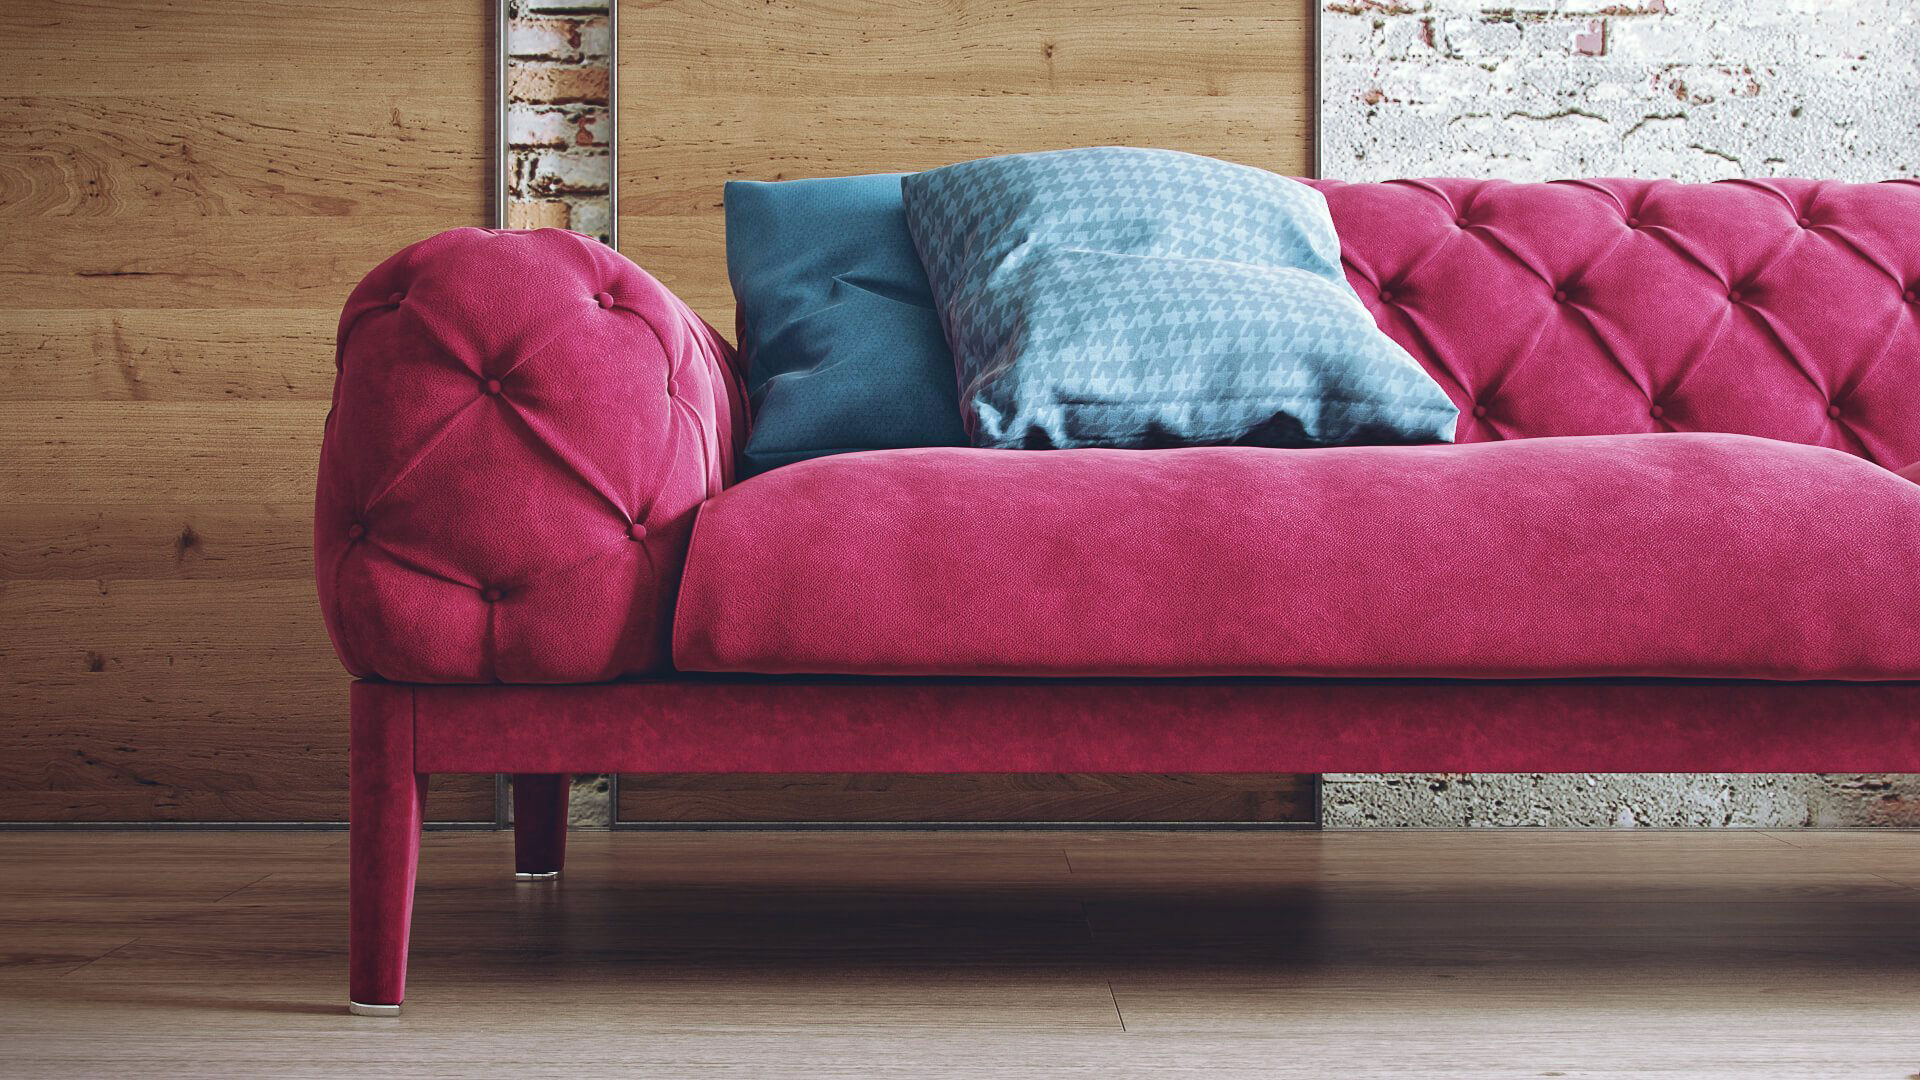 A Close-Up View of a Couch Made With the Help of 3D Texturing Tool